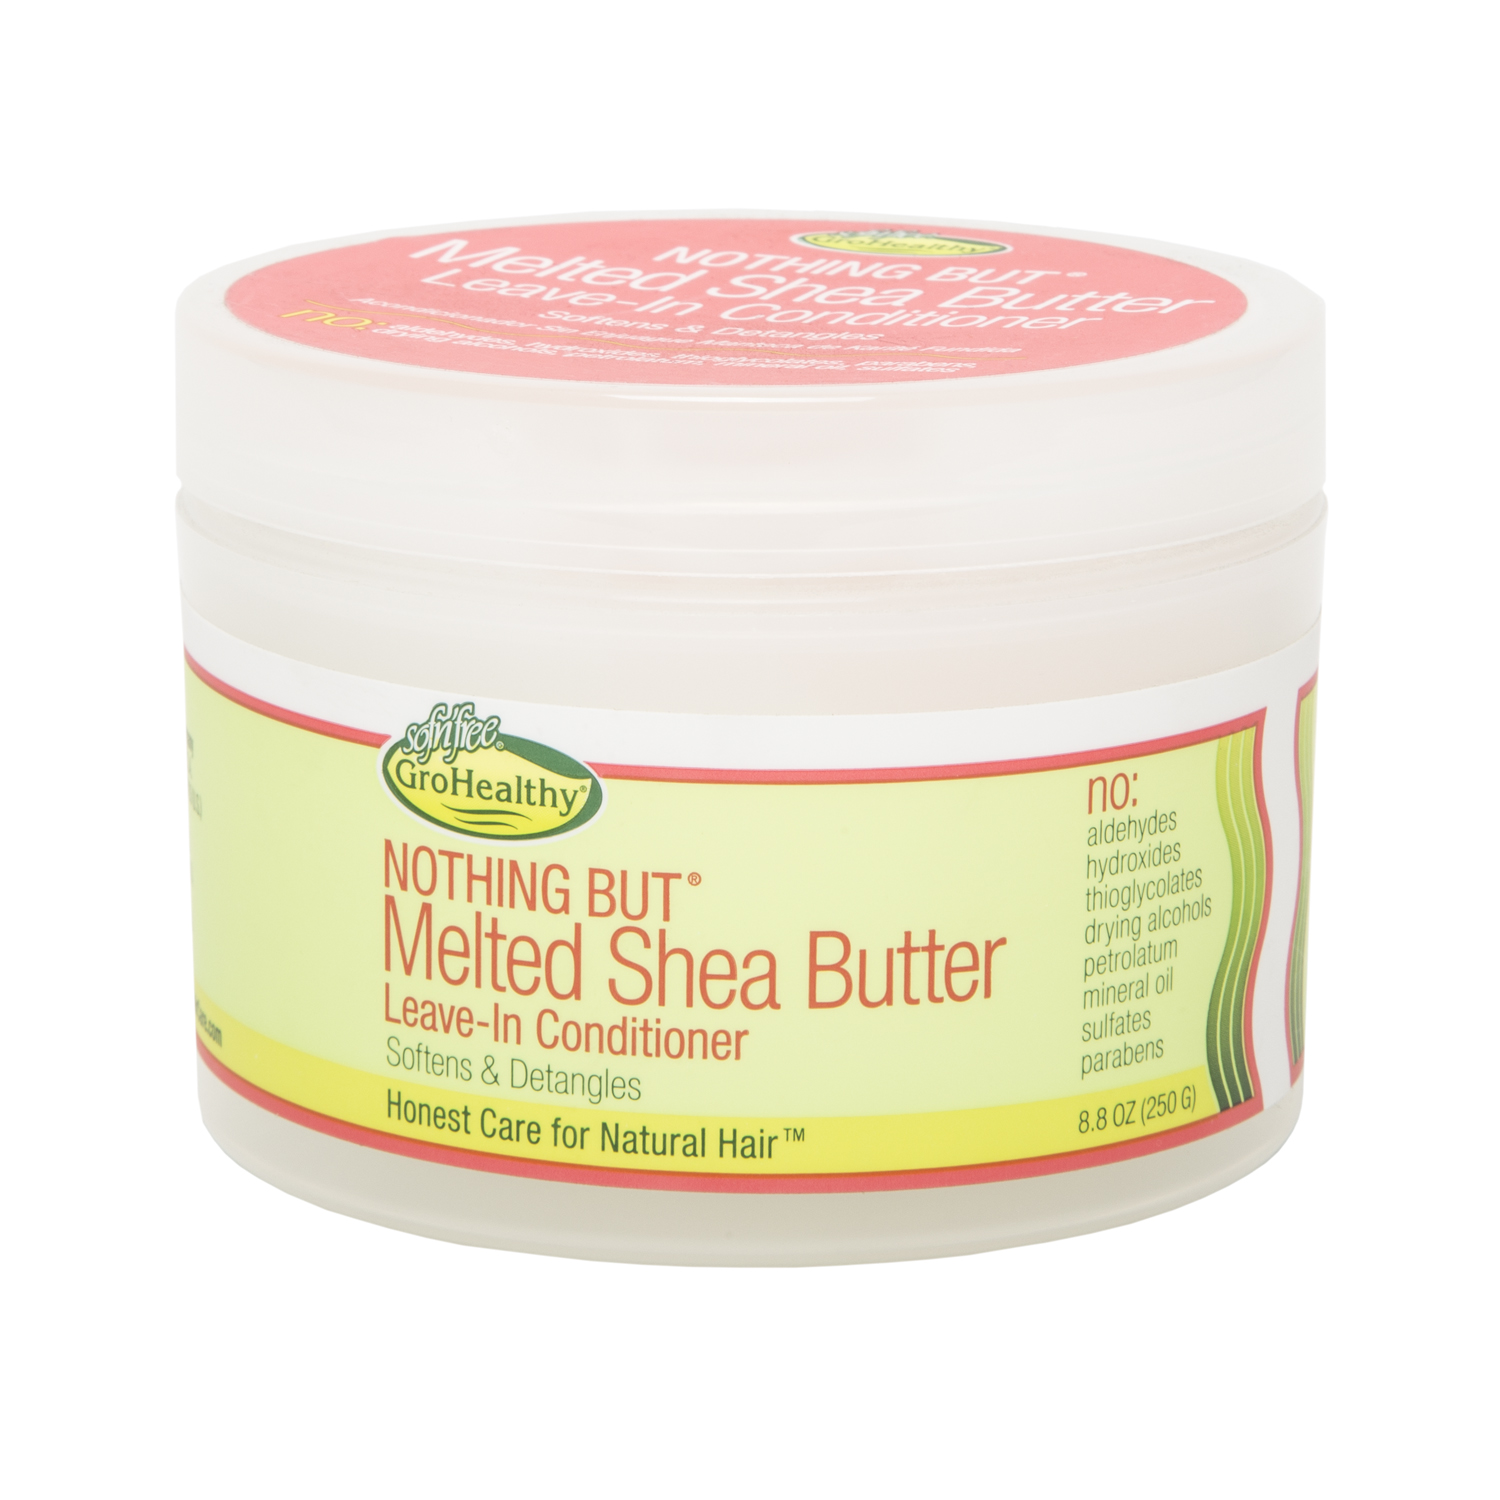 Nothing But Melted Shea Butter Leave-in Conditioner Hare Care 8.8 oz - image 1 of 2